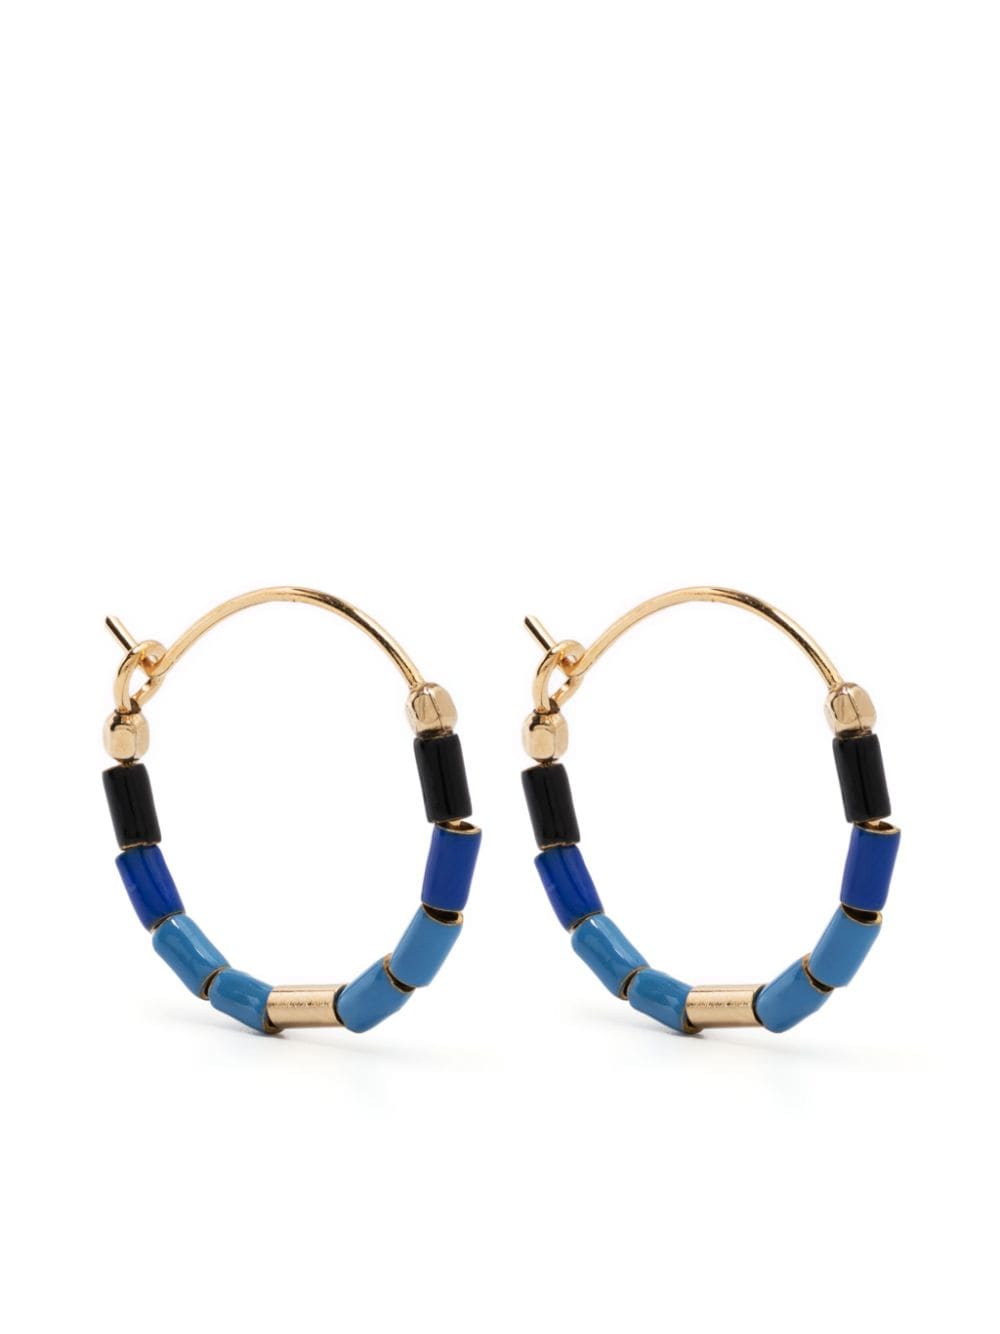 ISABEL MARANT New Color Strip beaded earrings - Gold von ISABEL MARANT